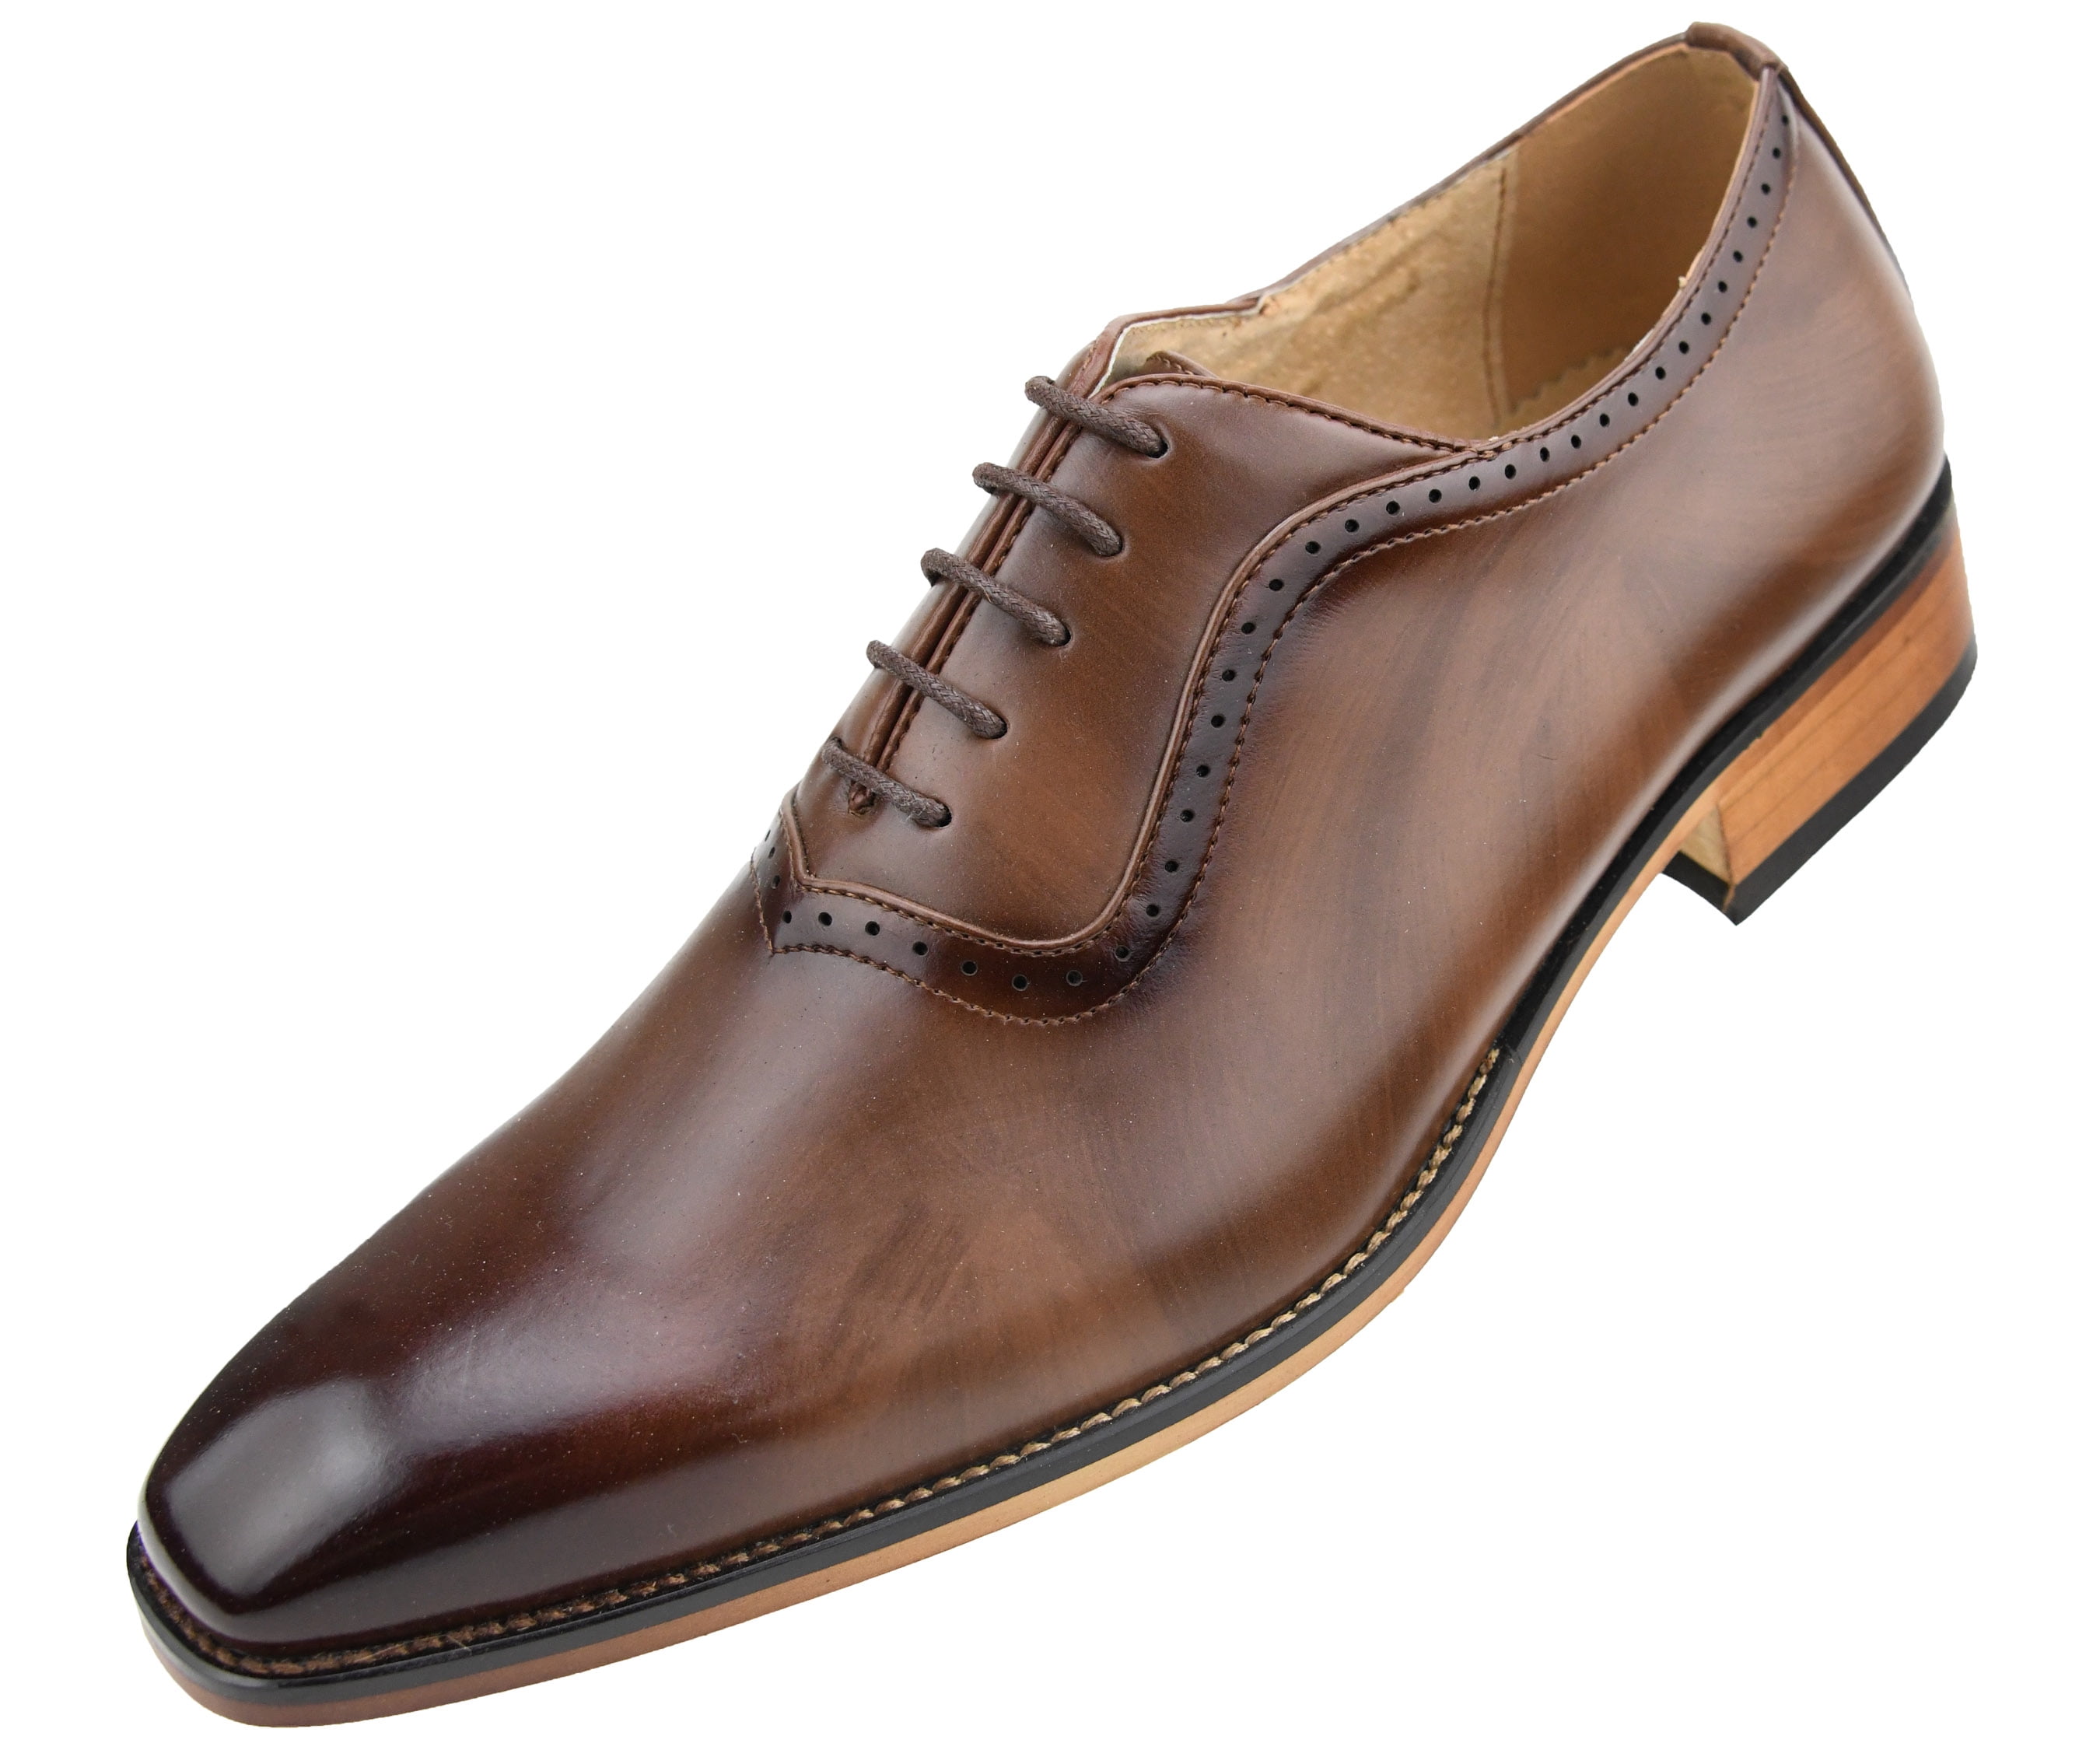 Amali Smooth Burnished Derby with Perforated Toe Men's Dress Shoe Connley 